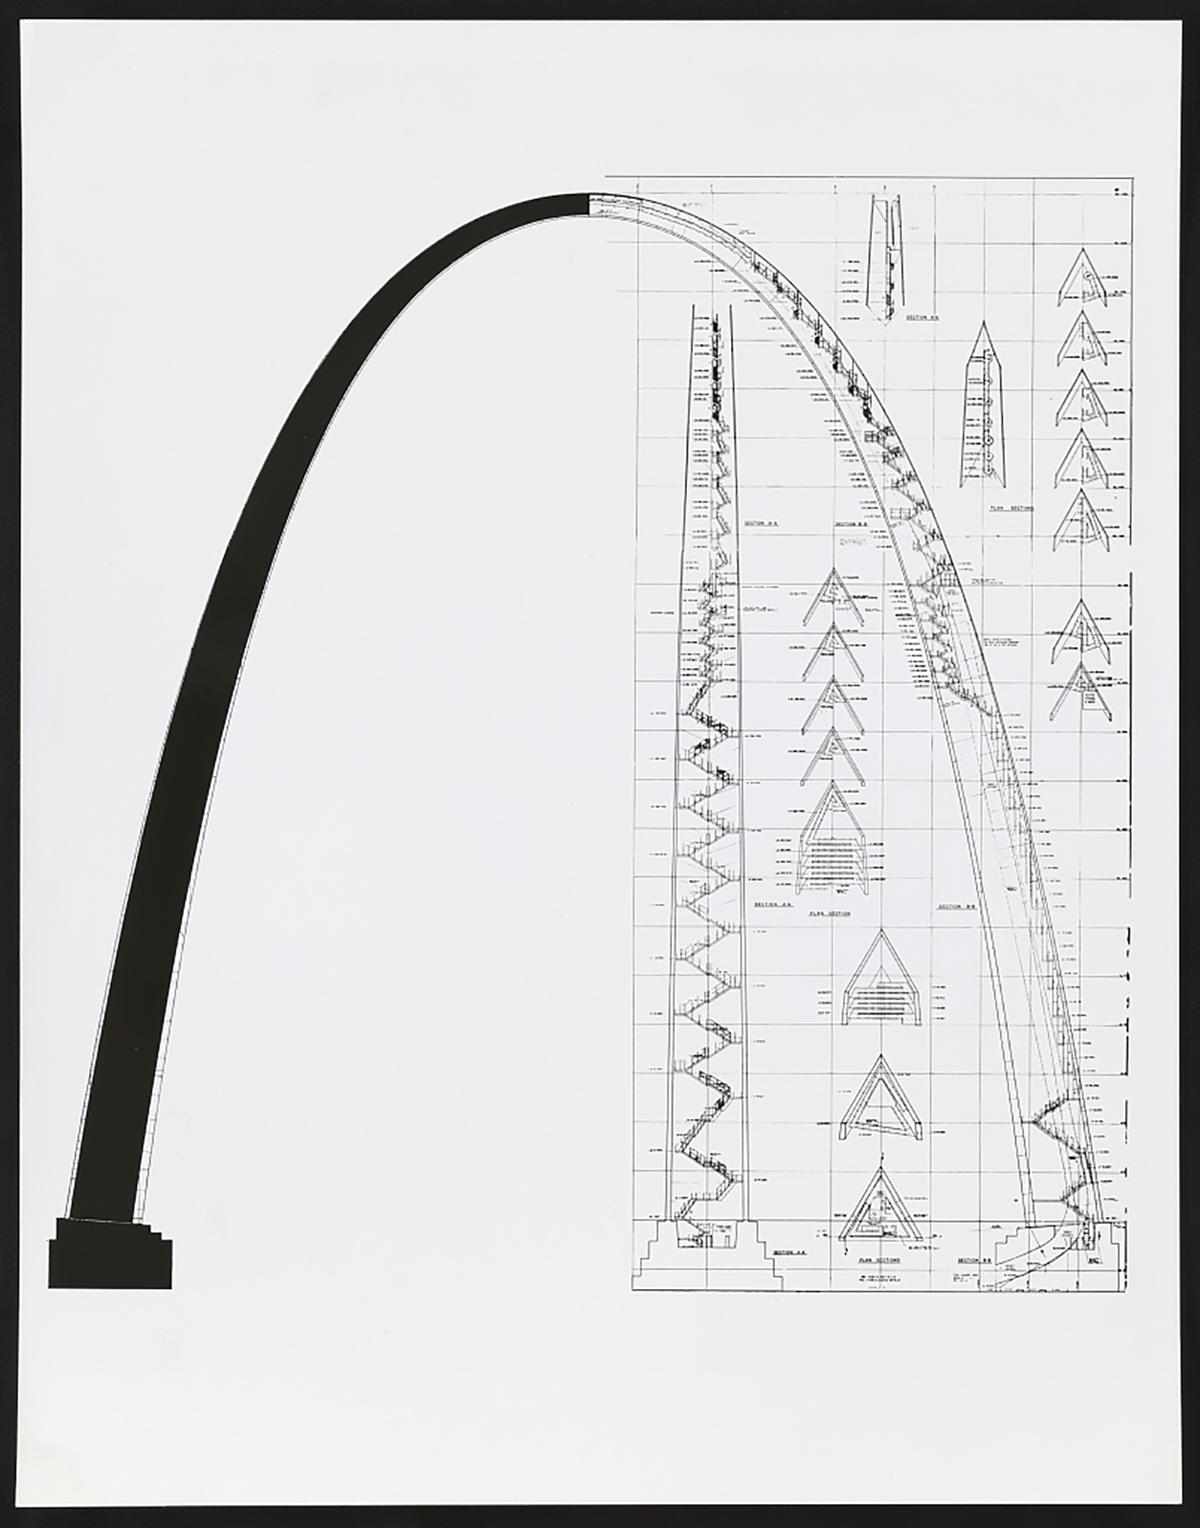 Architectural drawing of a a section of the Gateway Arch by Eero Saarinen. Library of Congress. (Public Domain)